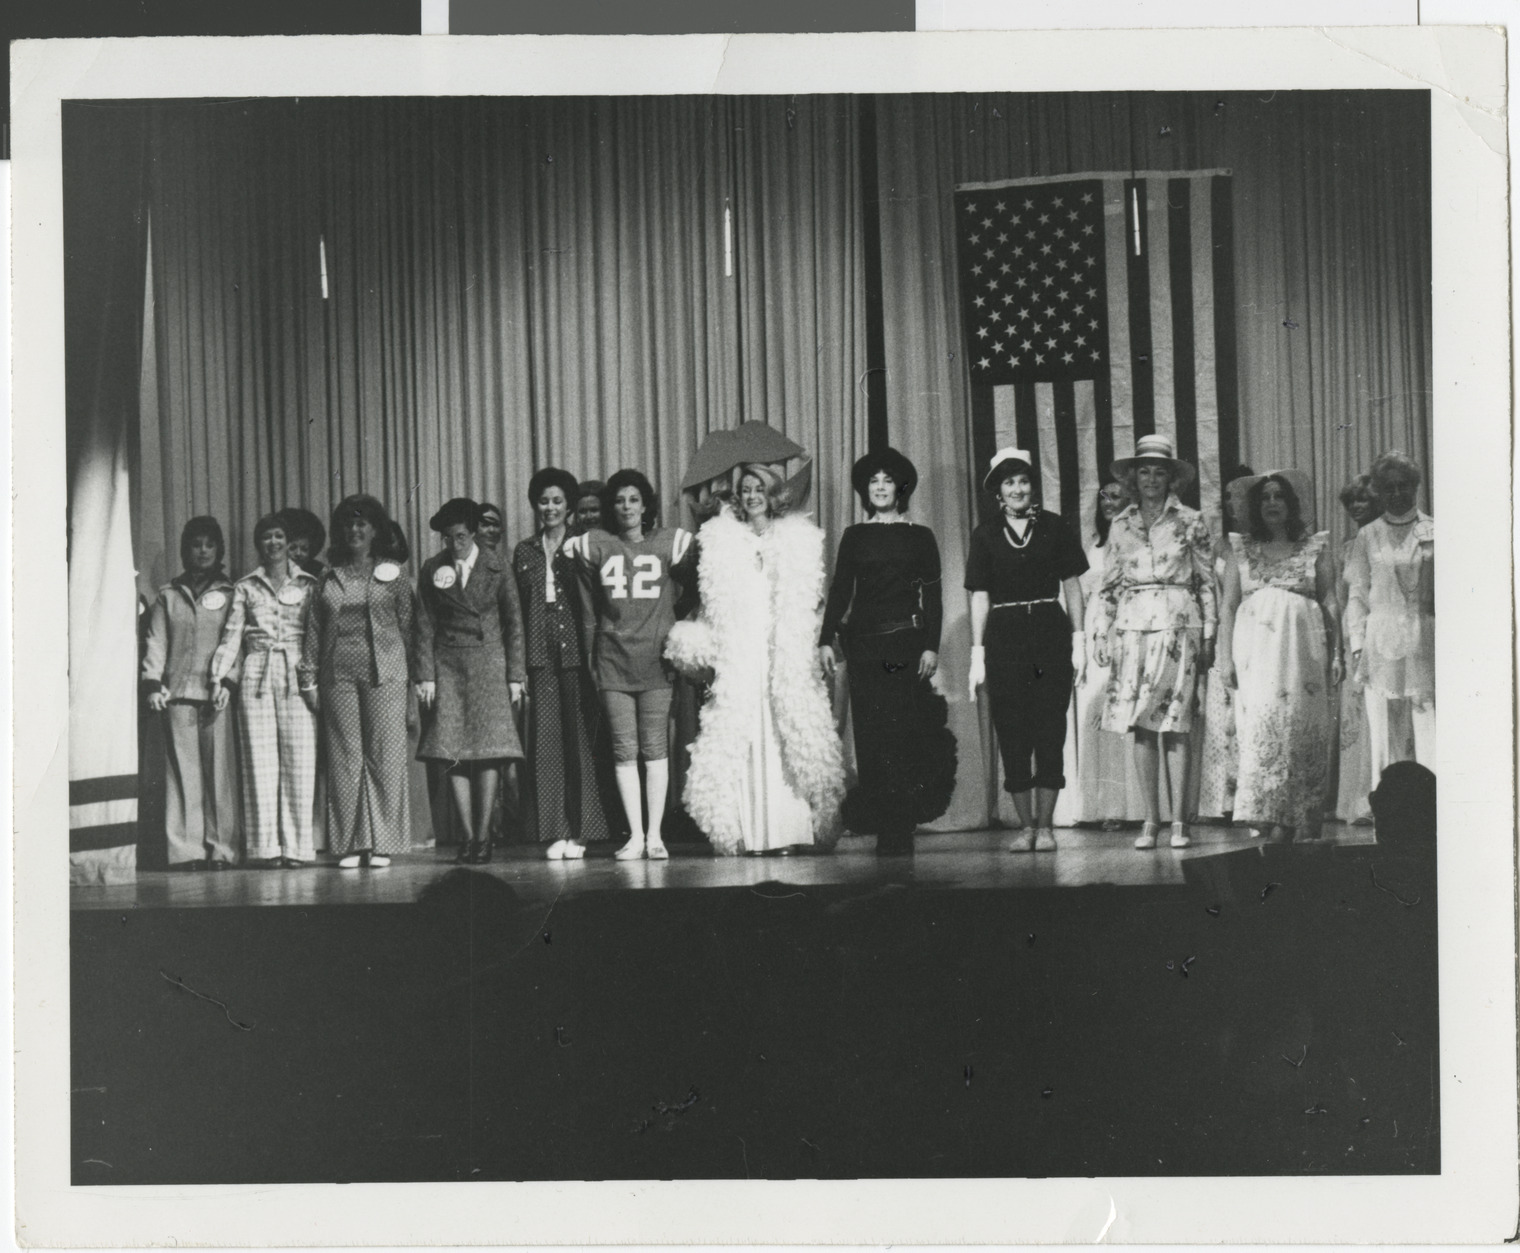 Photograph of actors on stage with Wilma Bass in jersey